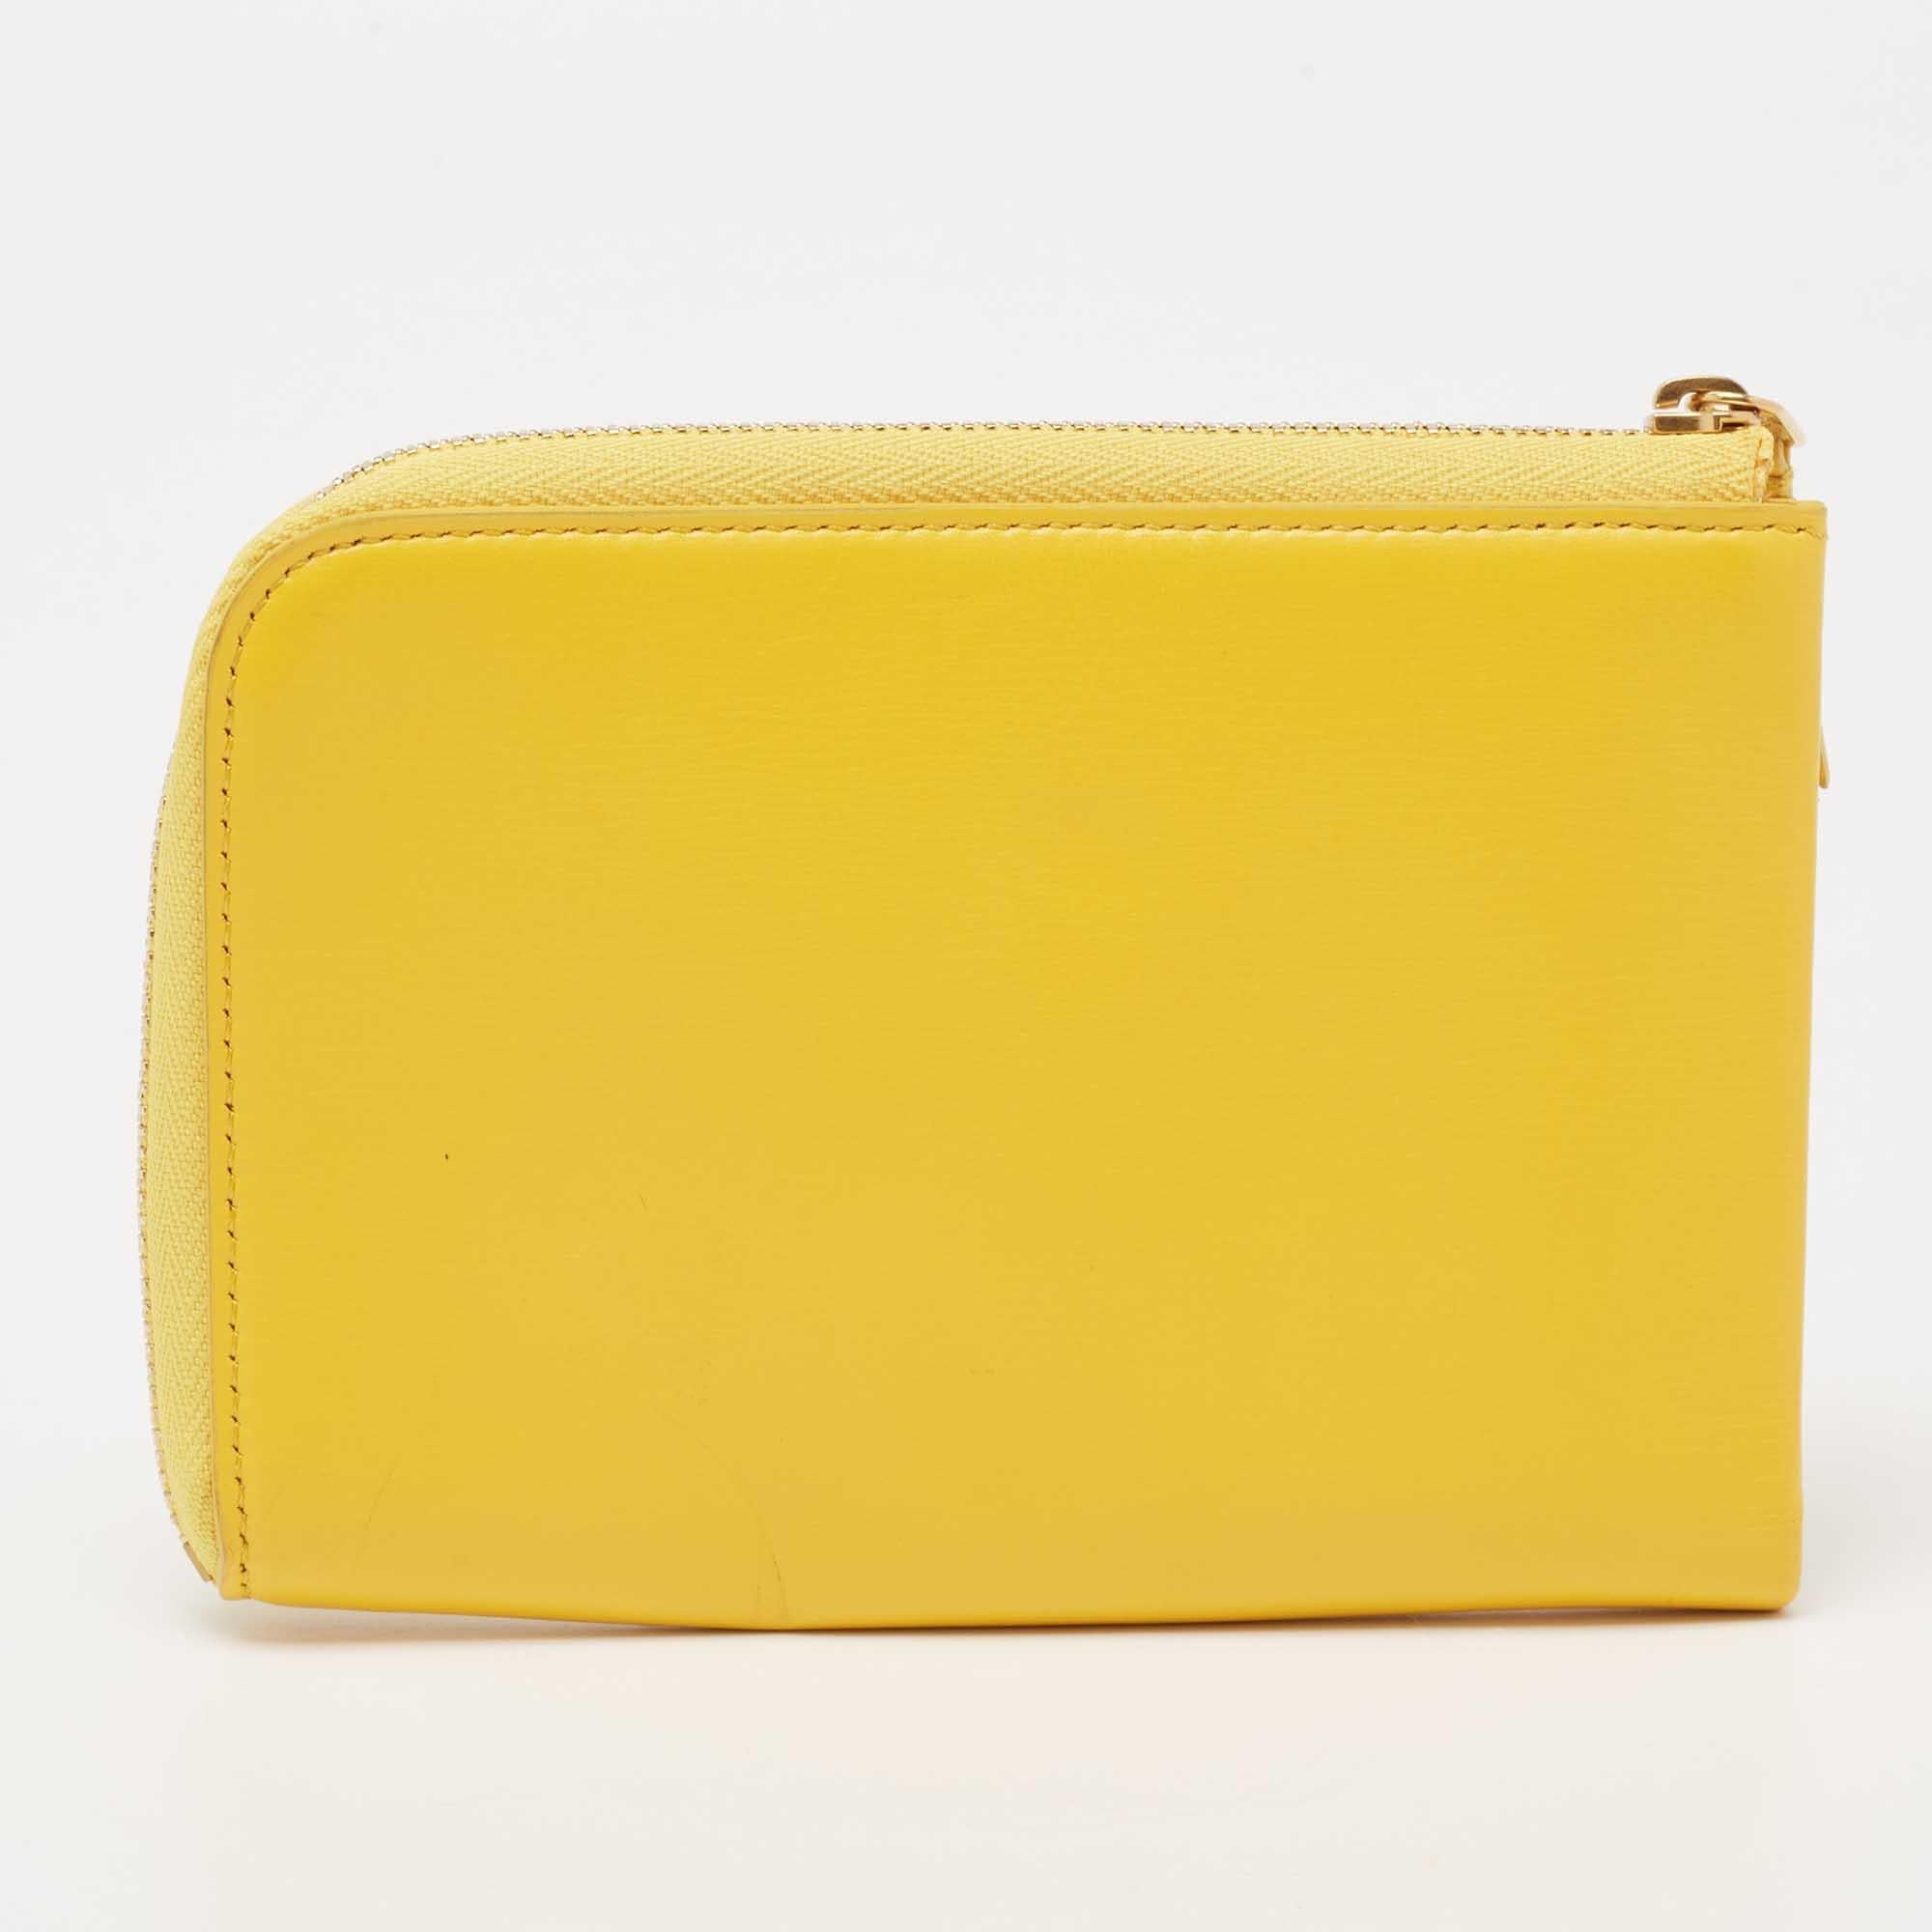 Compact and handy, this Celine wallet will work well as an everyday accessory. It has been crafted from yellow leather, and the creation is highlighted with the brand logo on the front and secured by a gold-tone zipper. The interior is divided into